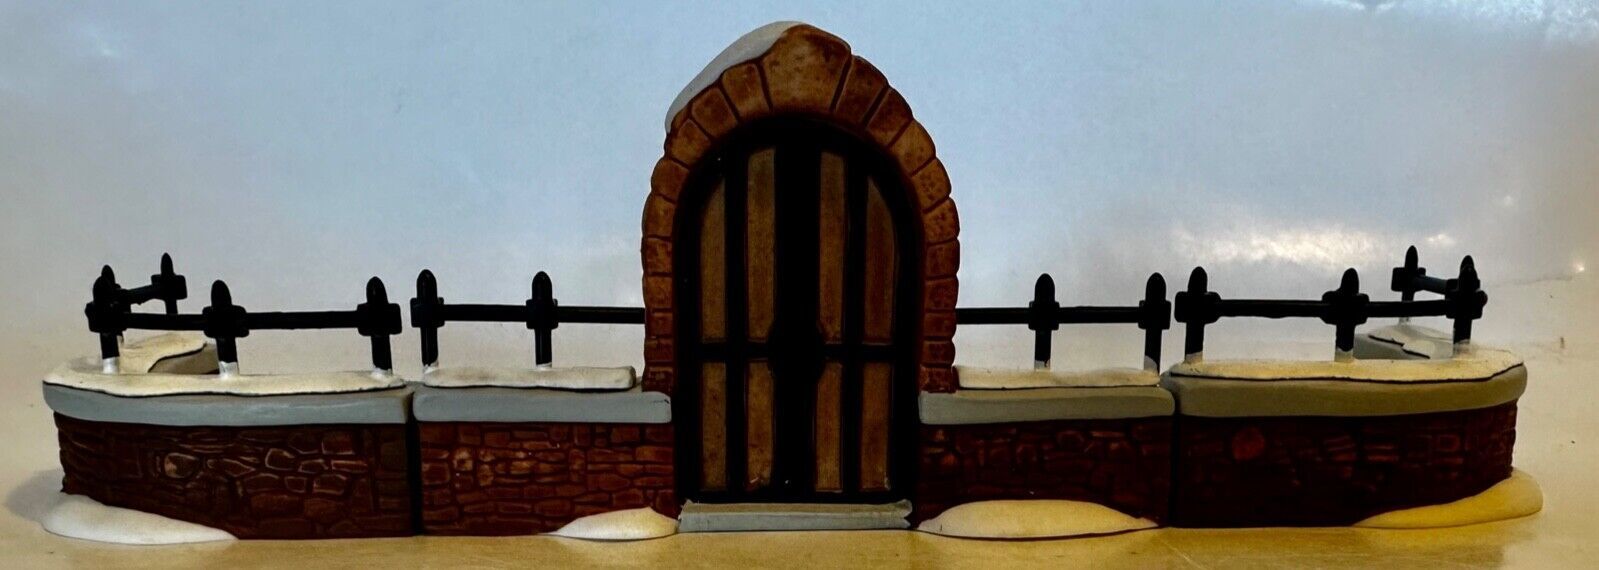 Dept 56 Heritage Village #58068 CHURCHYARD GATE & FENCE Accessory ~ Retired 1997 - $14.94